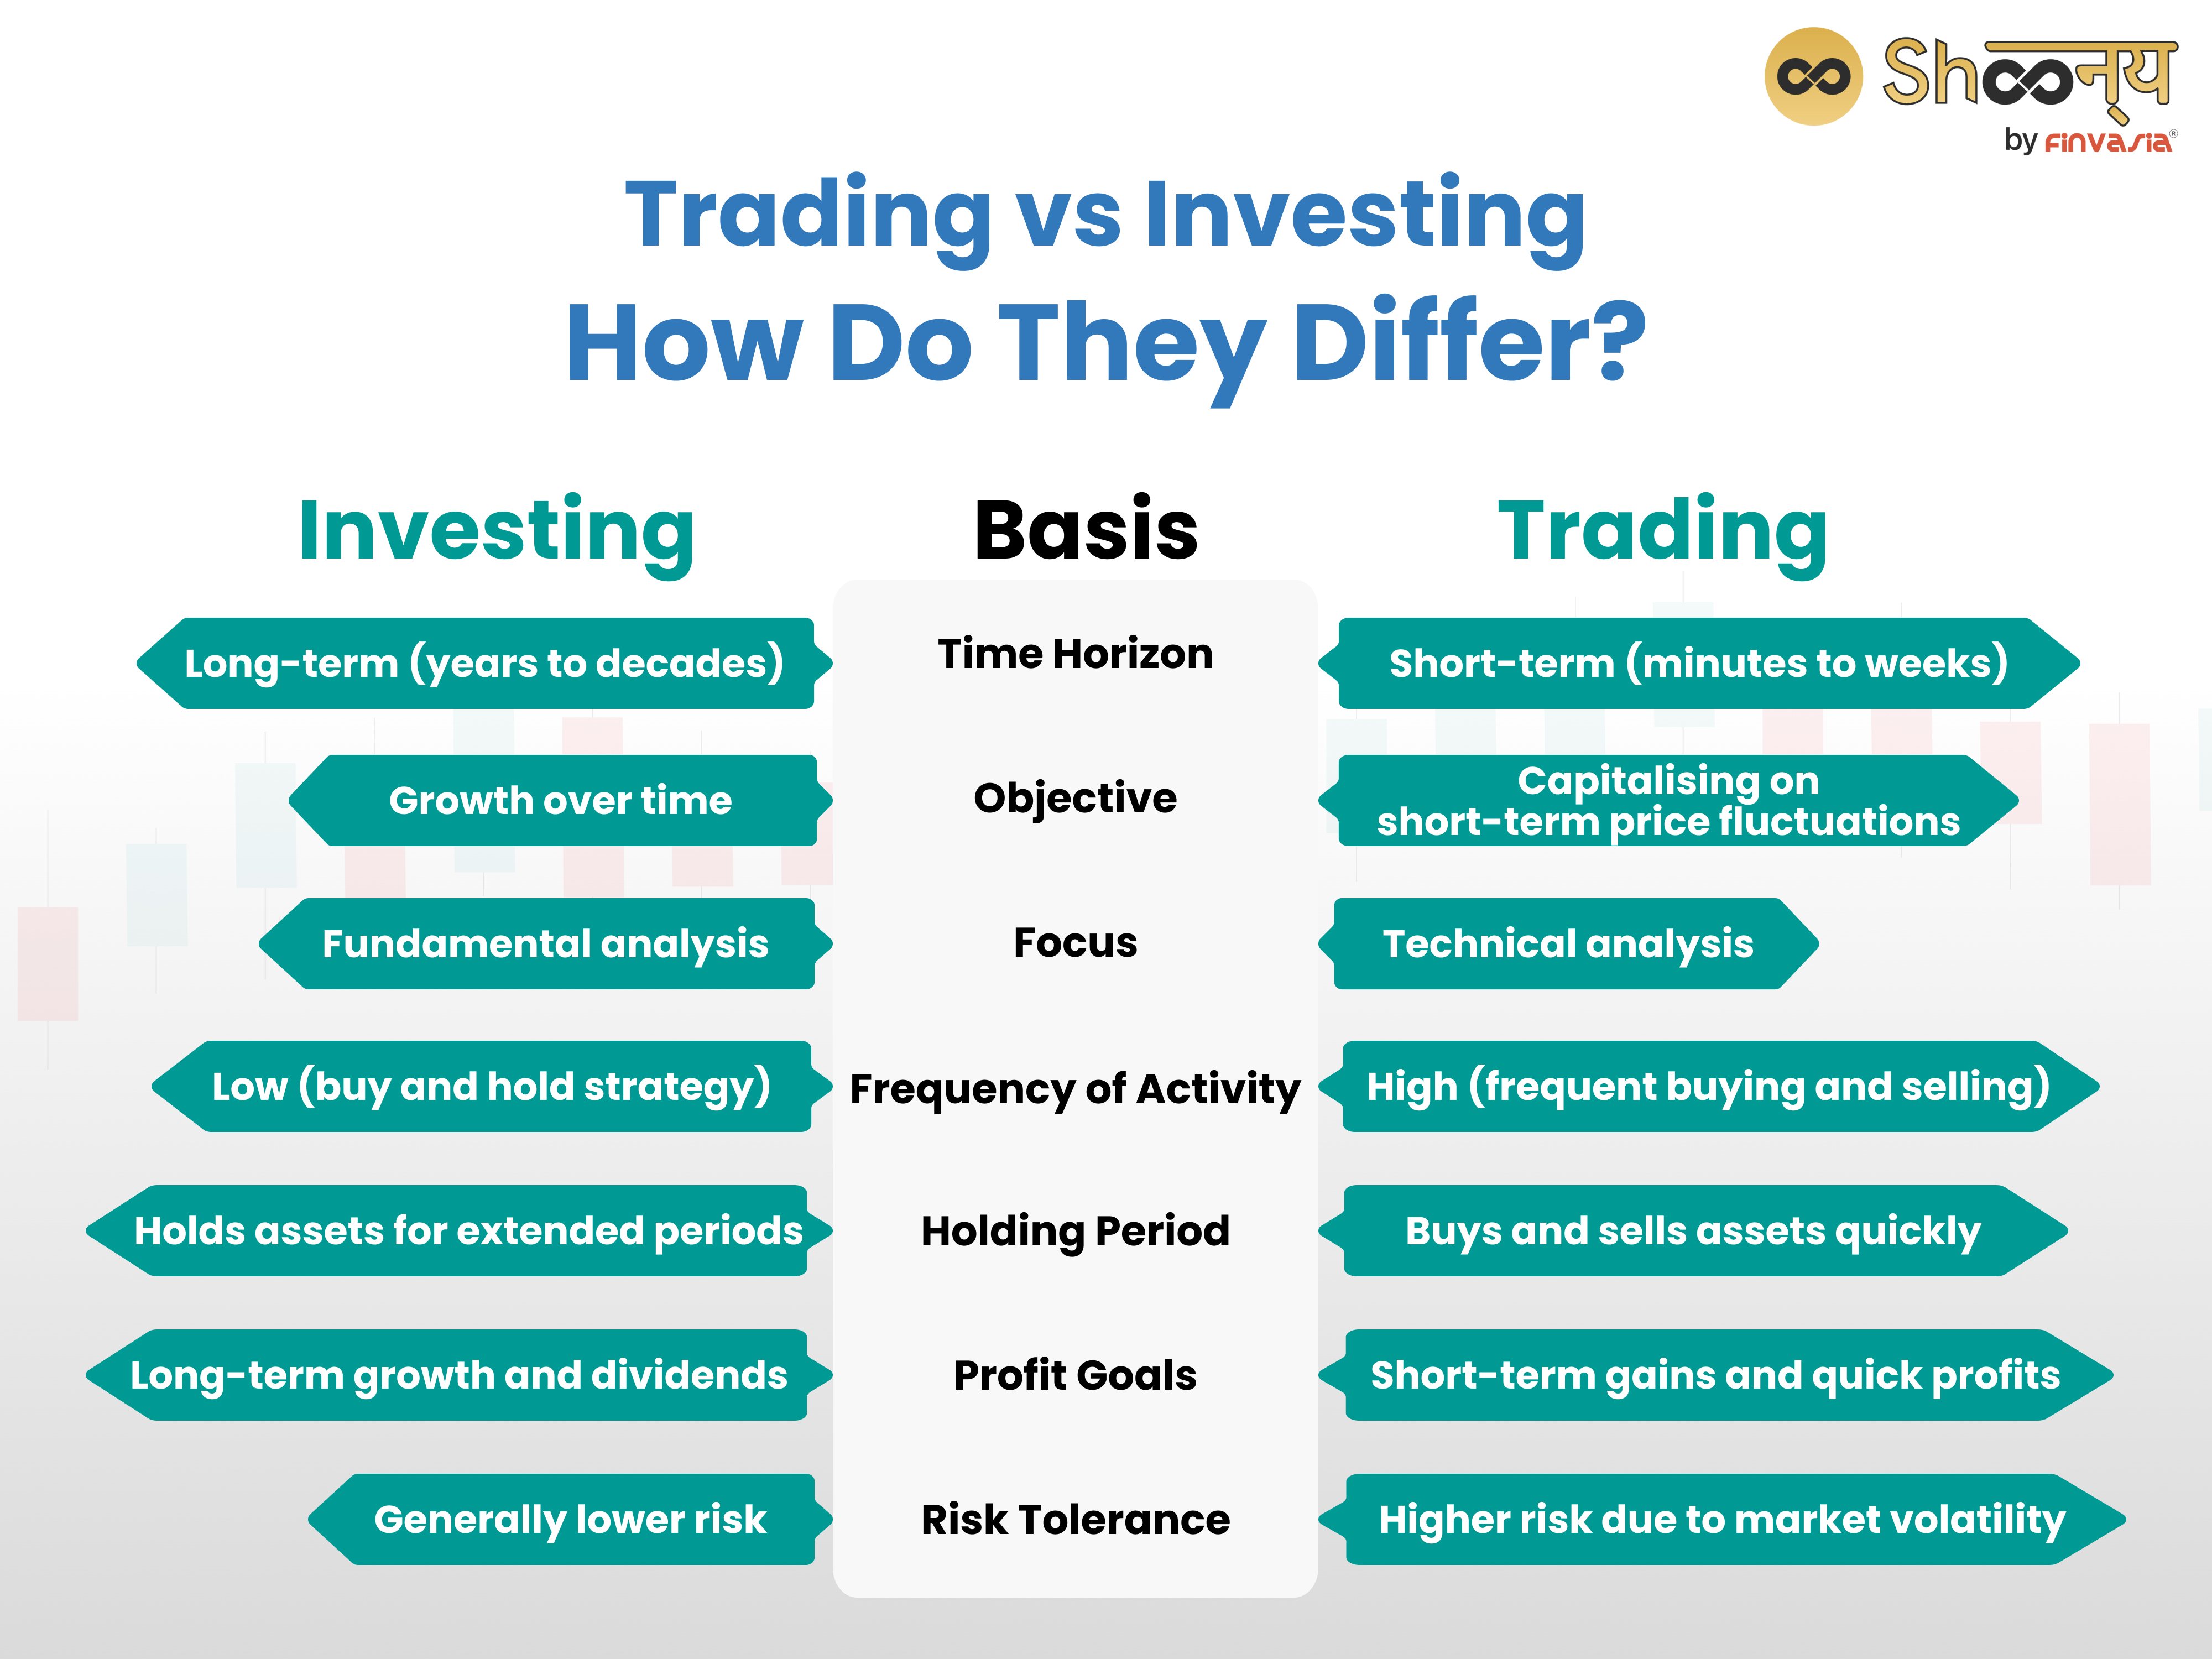 Trading vs Investing| How Do They Differ?